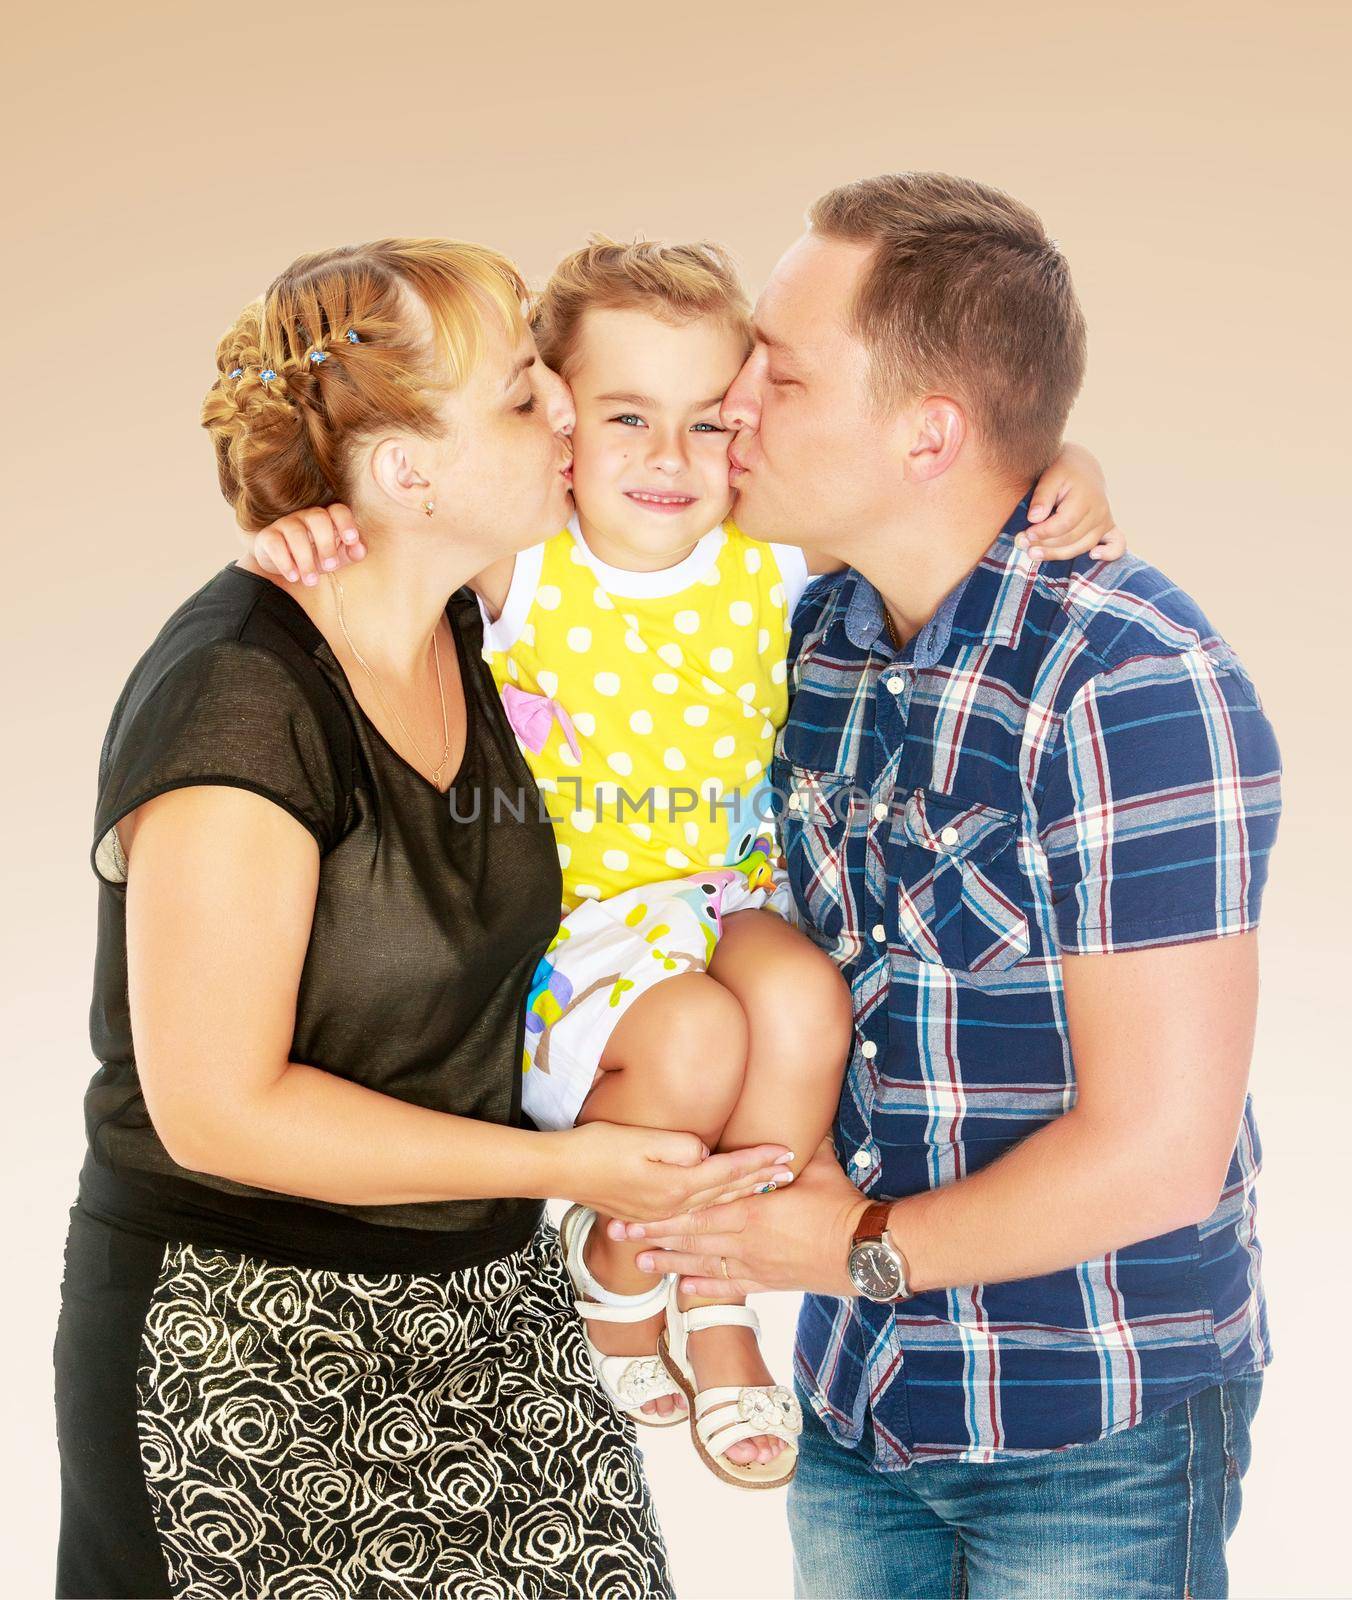 Happy parents and young daughter. by kolesnikov_studio